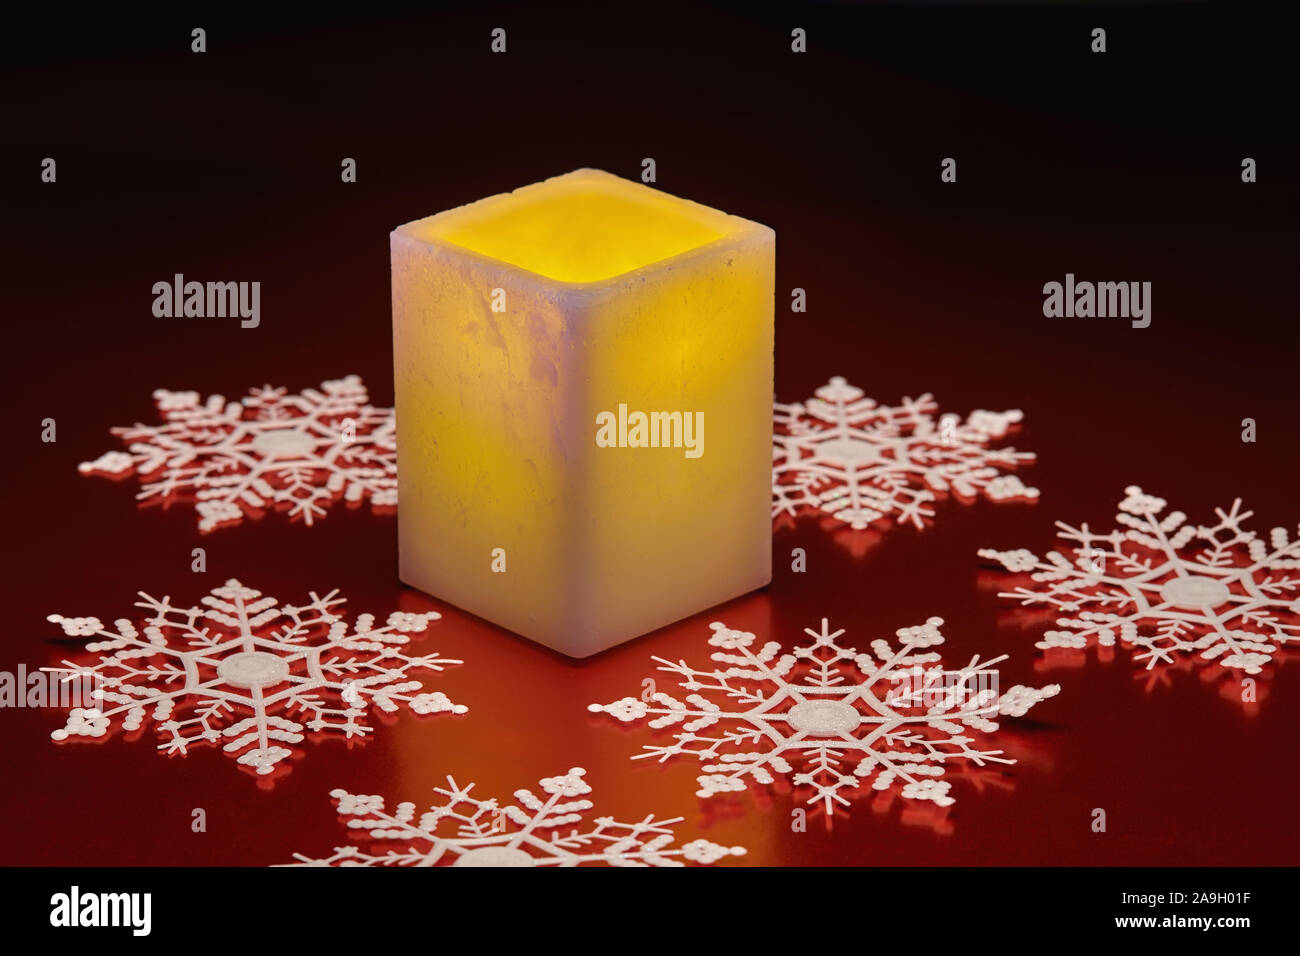 Winter holiday still life of glowing square electric candle and white snowflakes on red tabletop Stock Photo